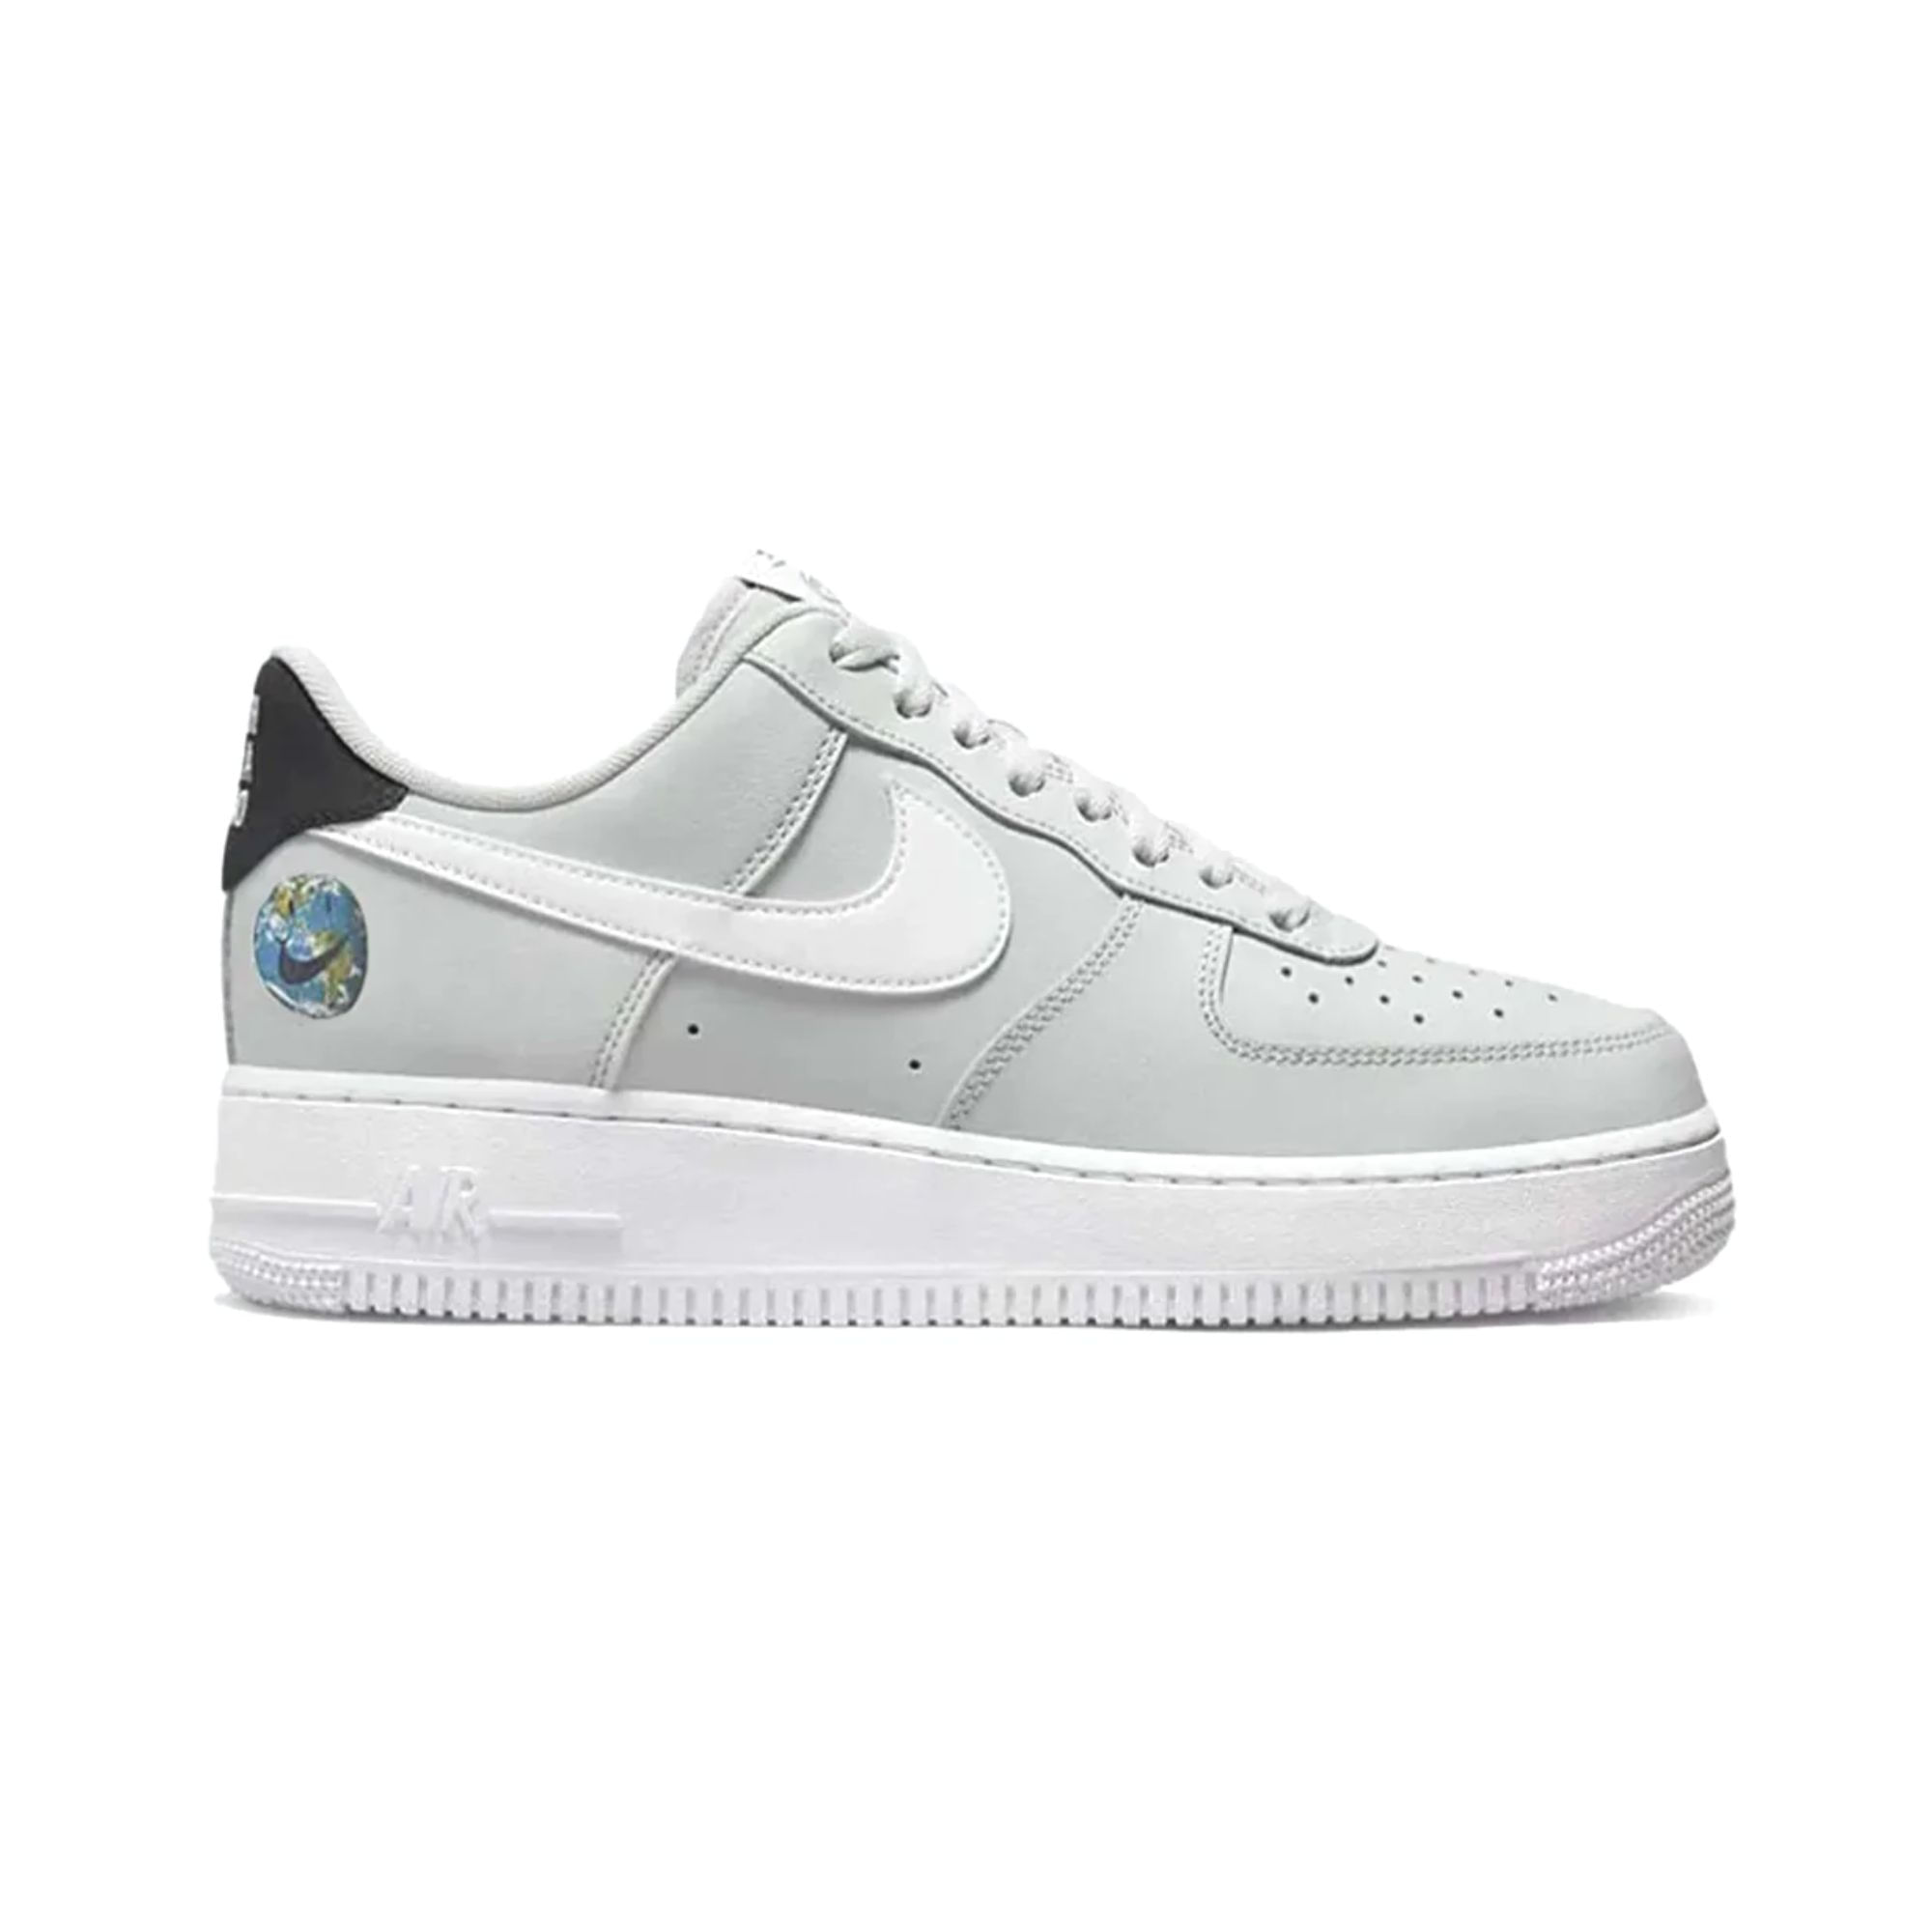 Nike Air Force 1 Low Have a Nike Day Earth Gris Blanco Negro para Hombre